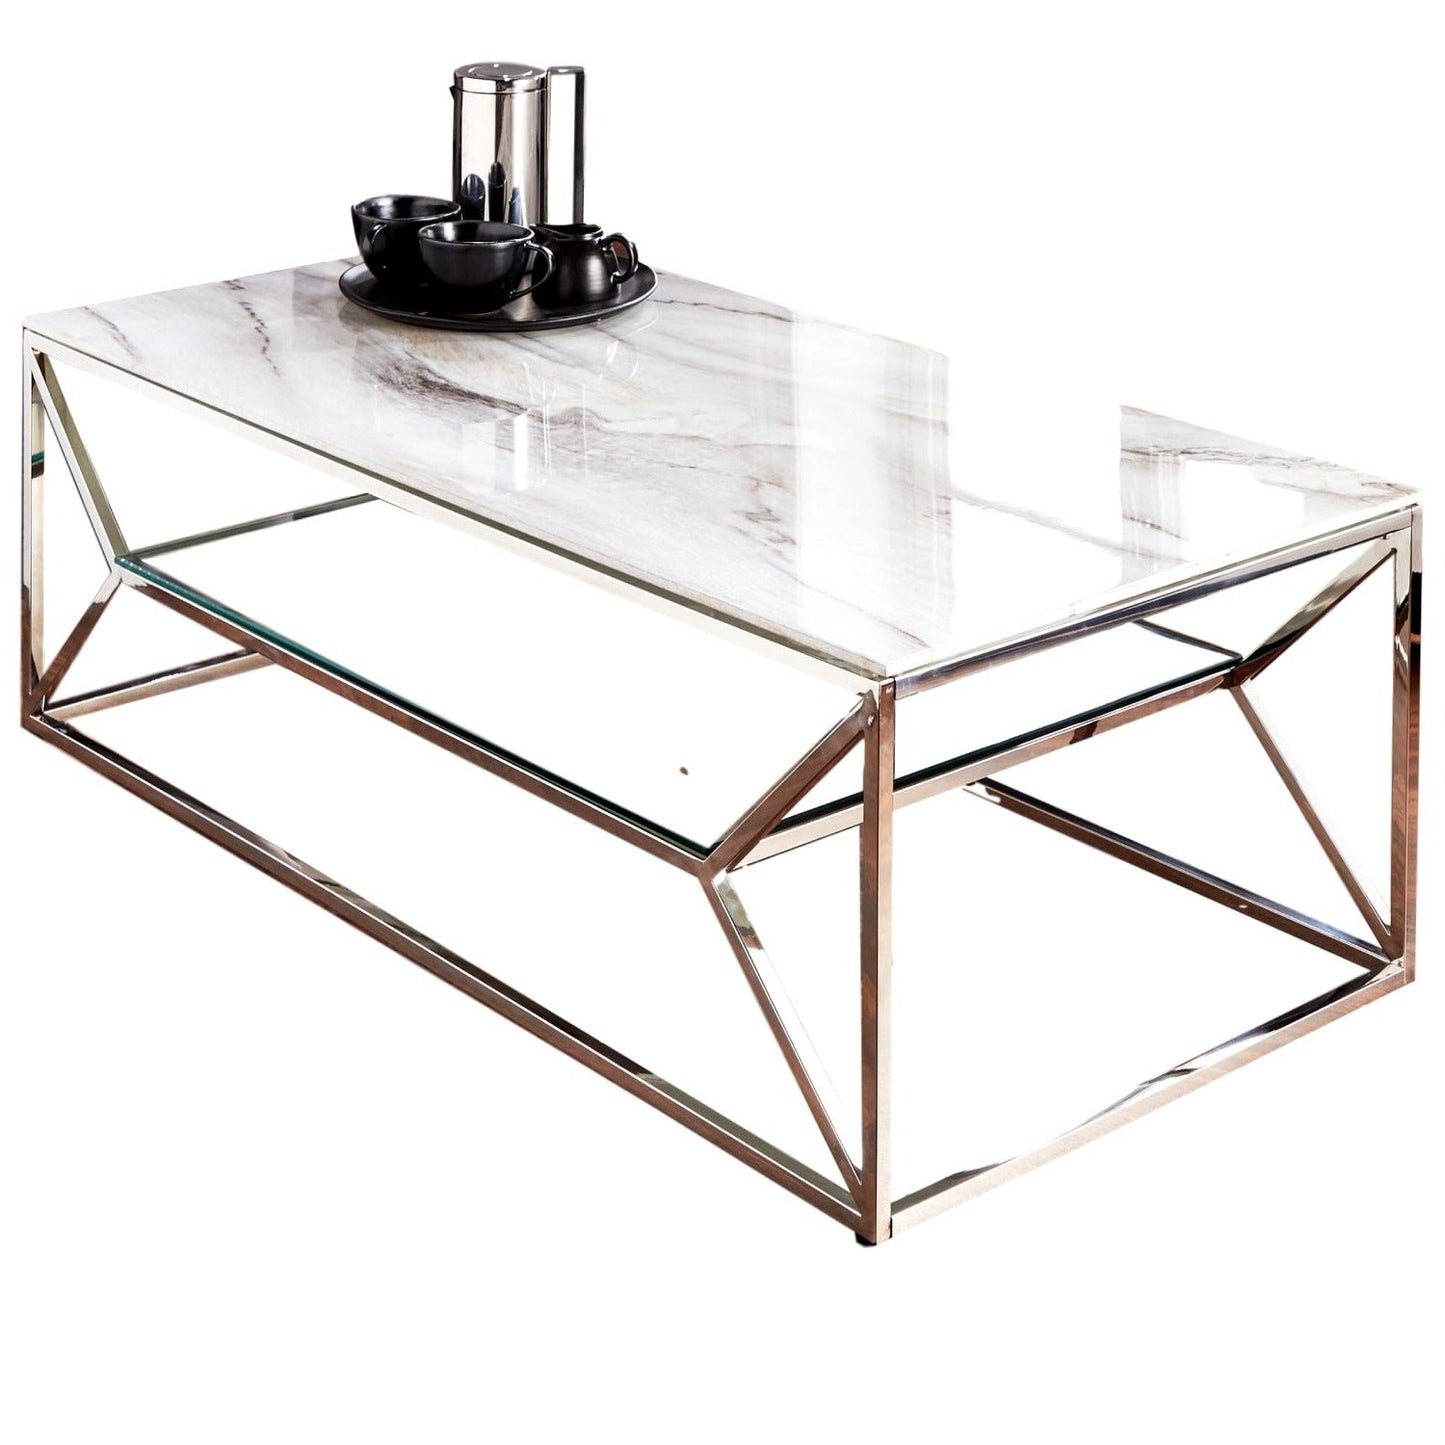 Marble glass coffee table by Native